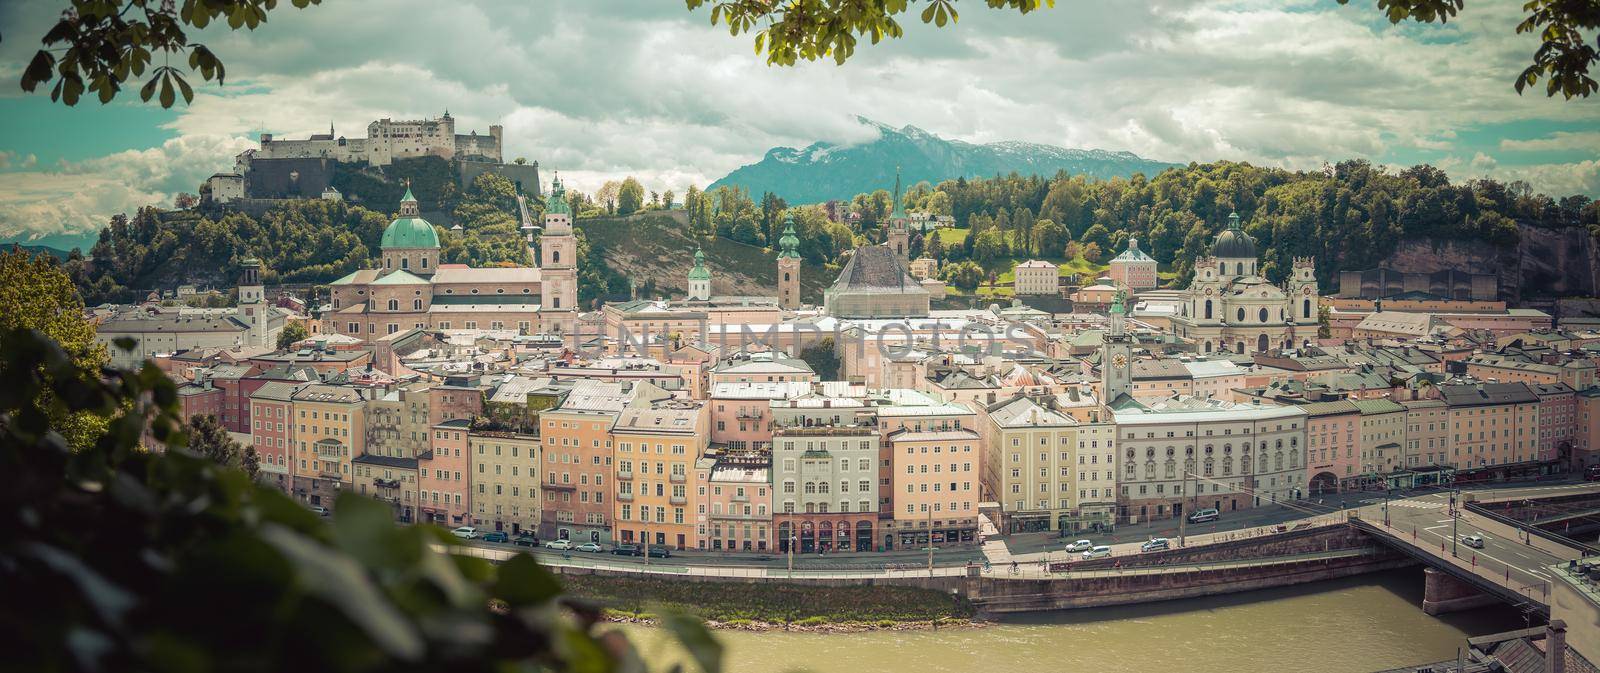 Vacation in Salzburg: Salzburg old city with fortress and cathedral in spring, Austria by Daxenbichler